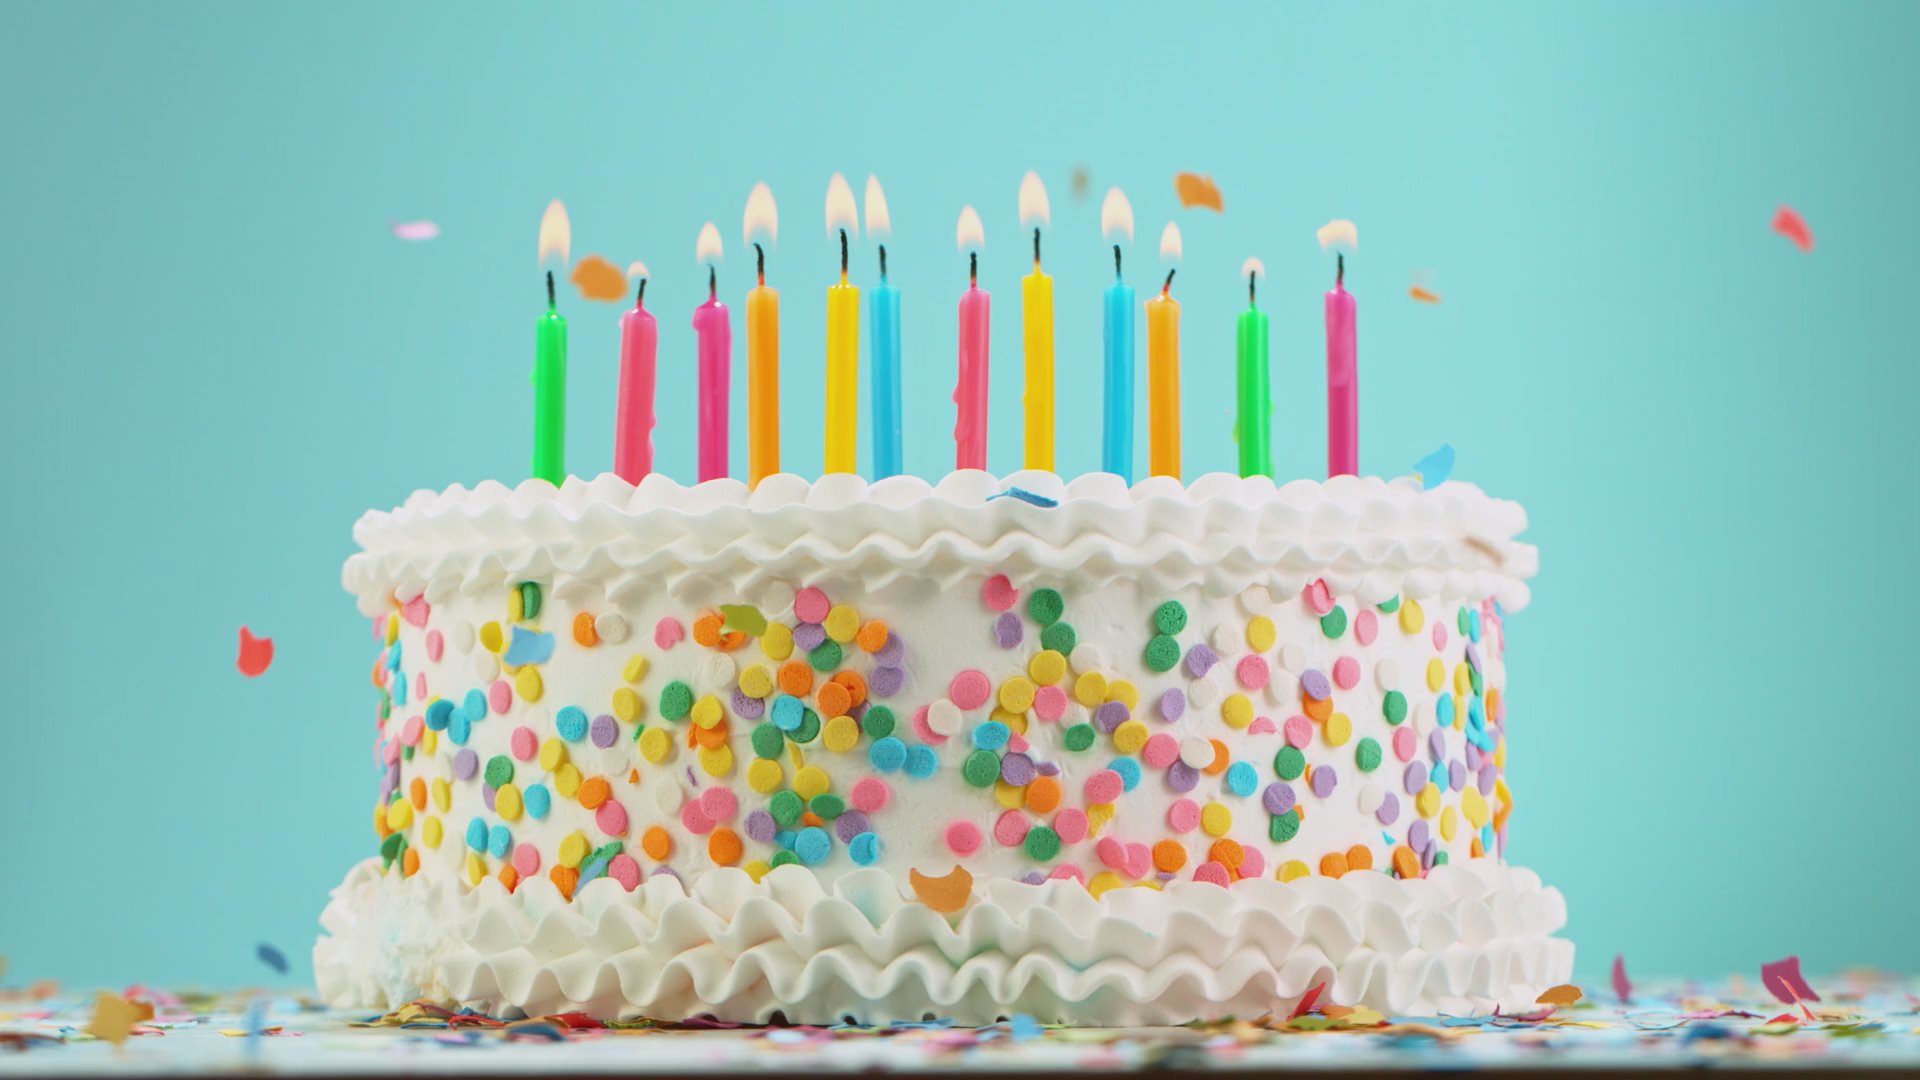 Video of a Birthday cake with burning candles and flying confetti